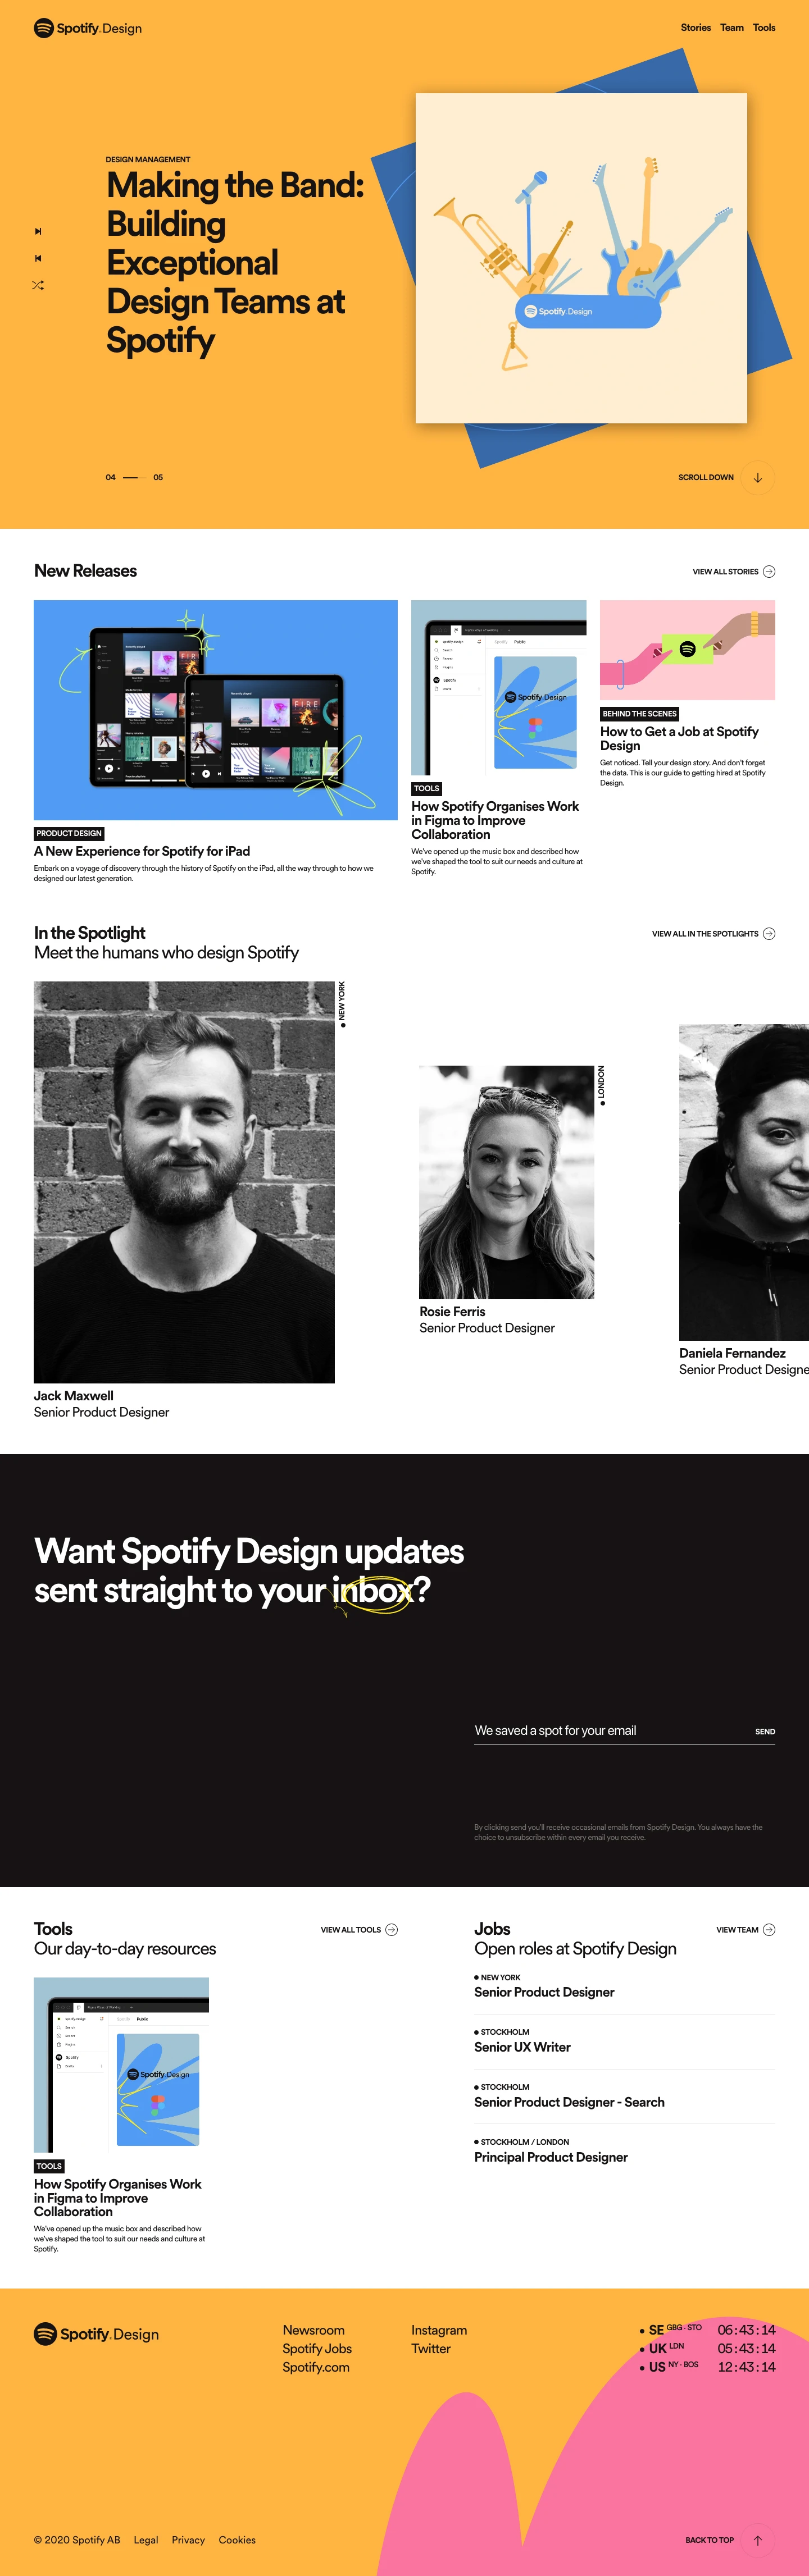 Spotify Design Landing Page Example: Spotify Design are a cross-disciplinary product design community. We love to create great experiences and make meaningful connections between listeners and creators. Here is where we share what we do and how we do it.